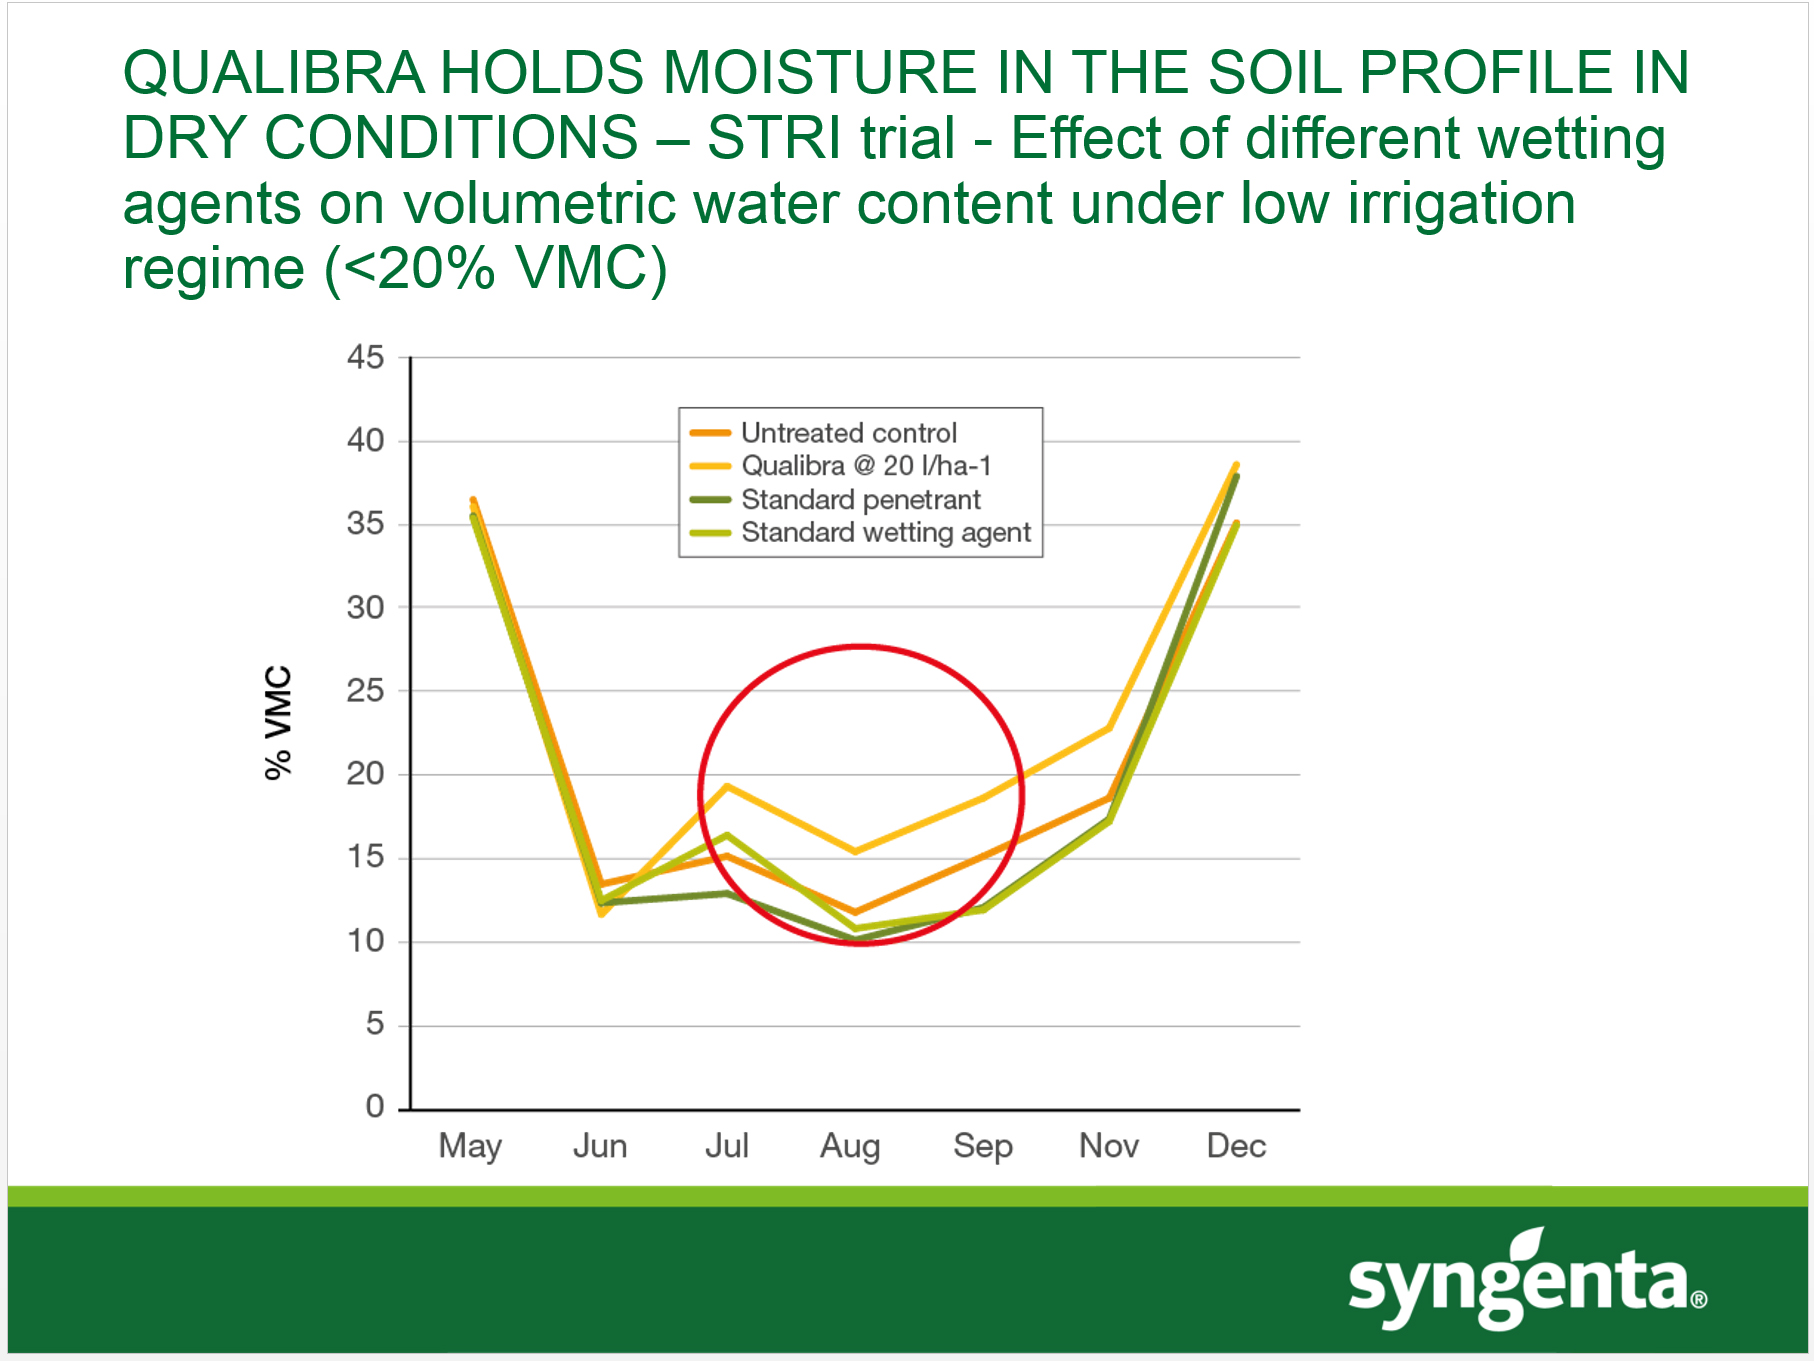 STRI trials result - positive retention of soil moisture in dry conditions